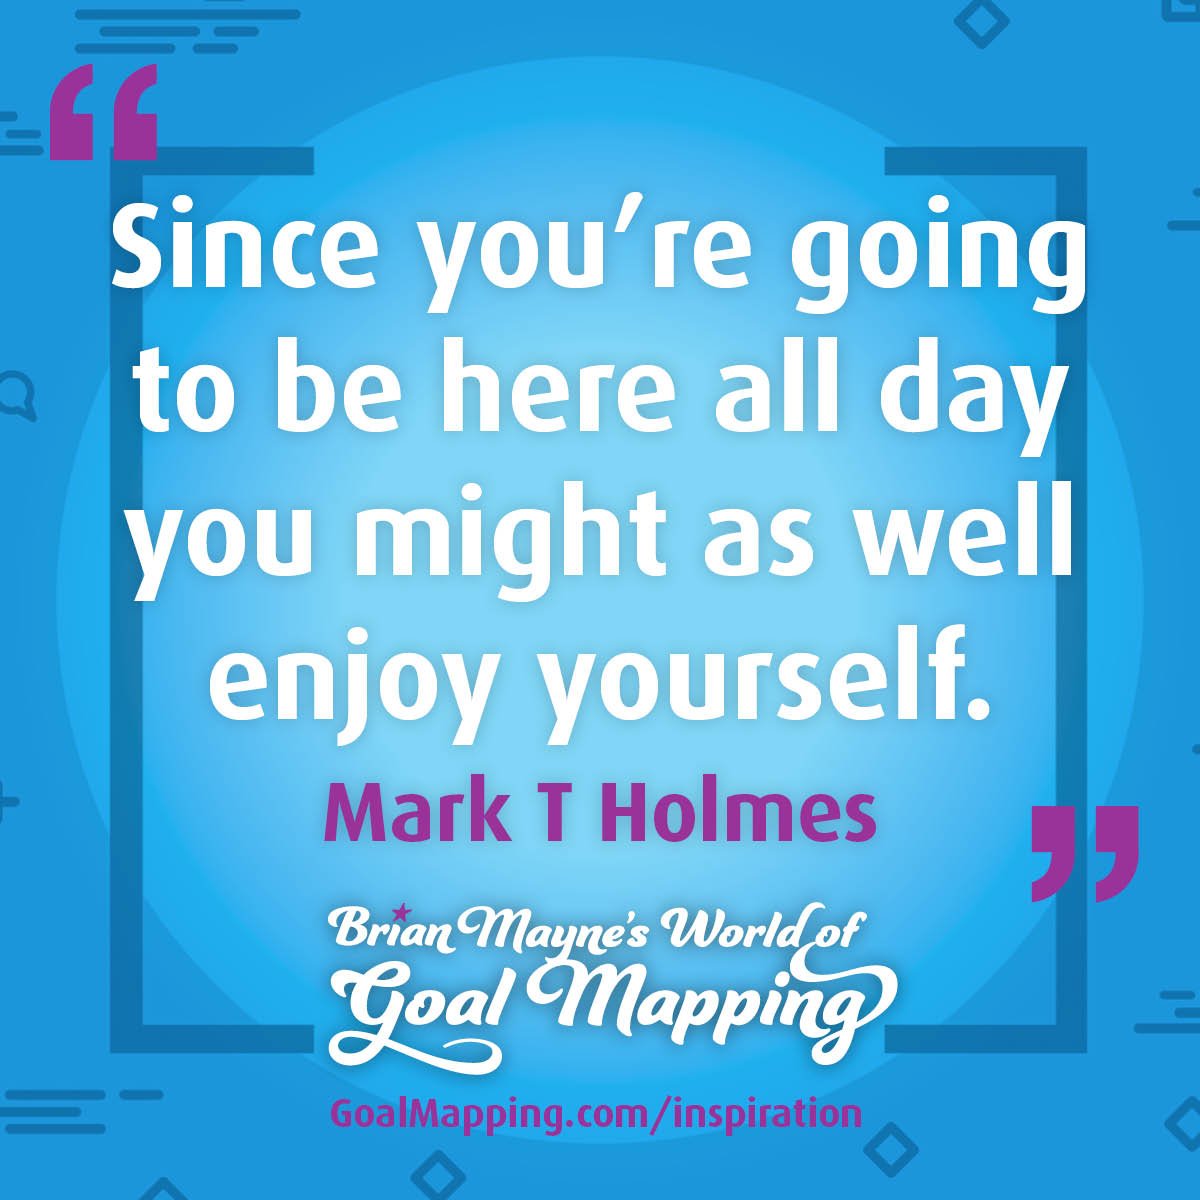 "Since you’re going to be here all day you might as well enjoy yourself." Mark T Holmes